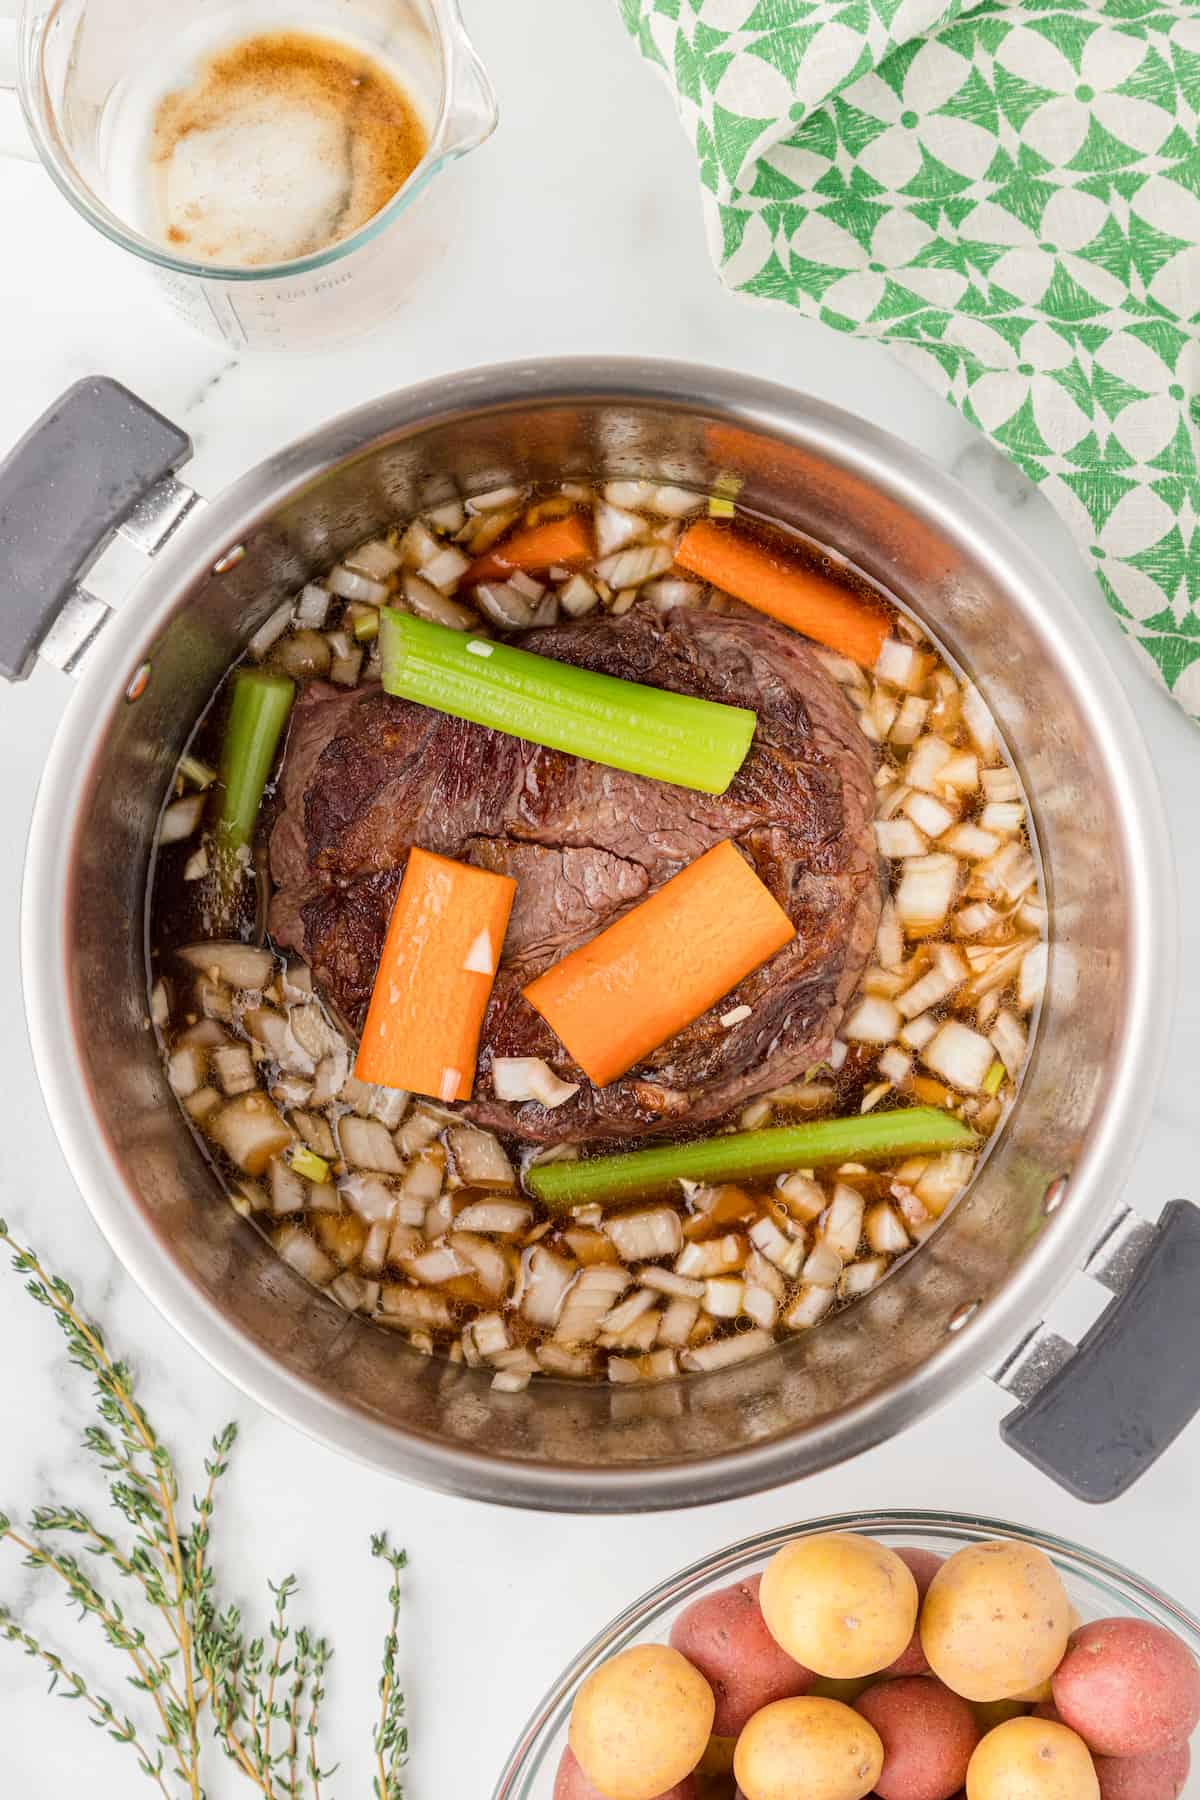 Add celery to the chuck roast in the Instant Pot